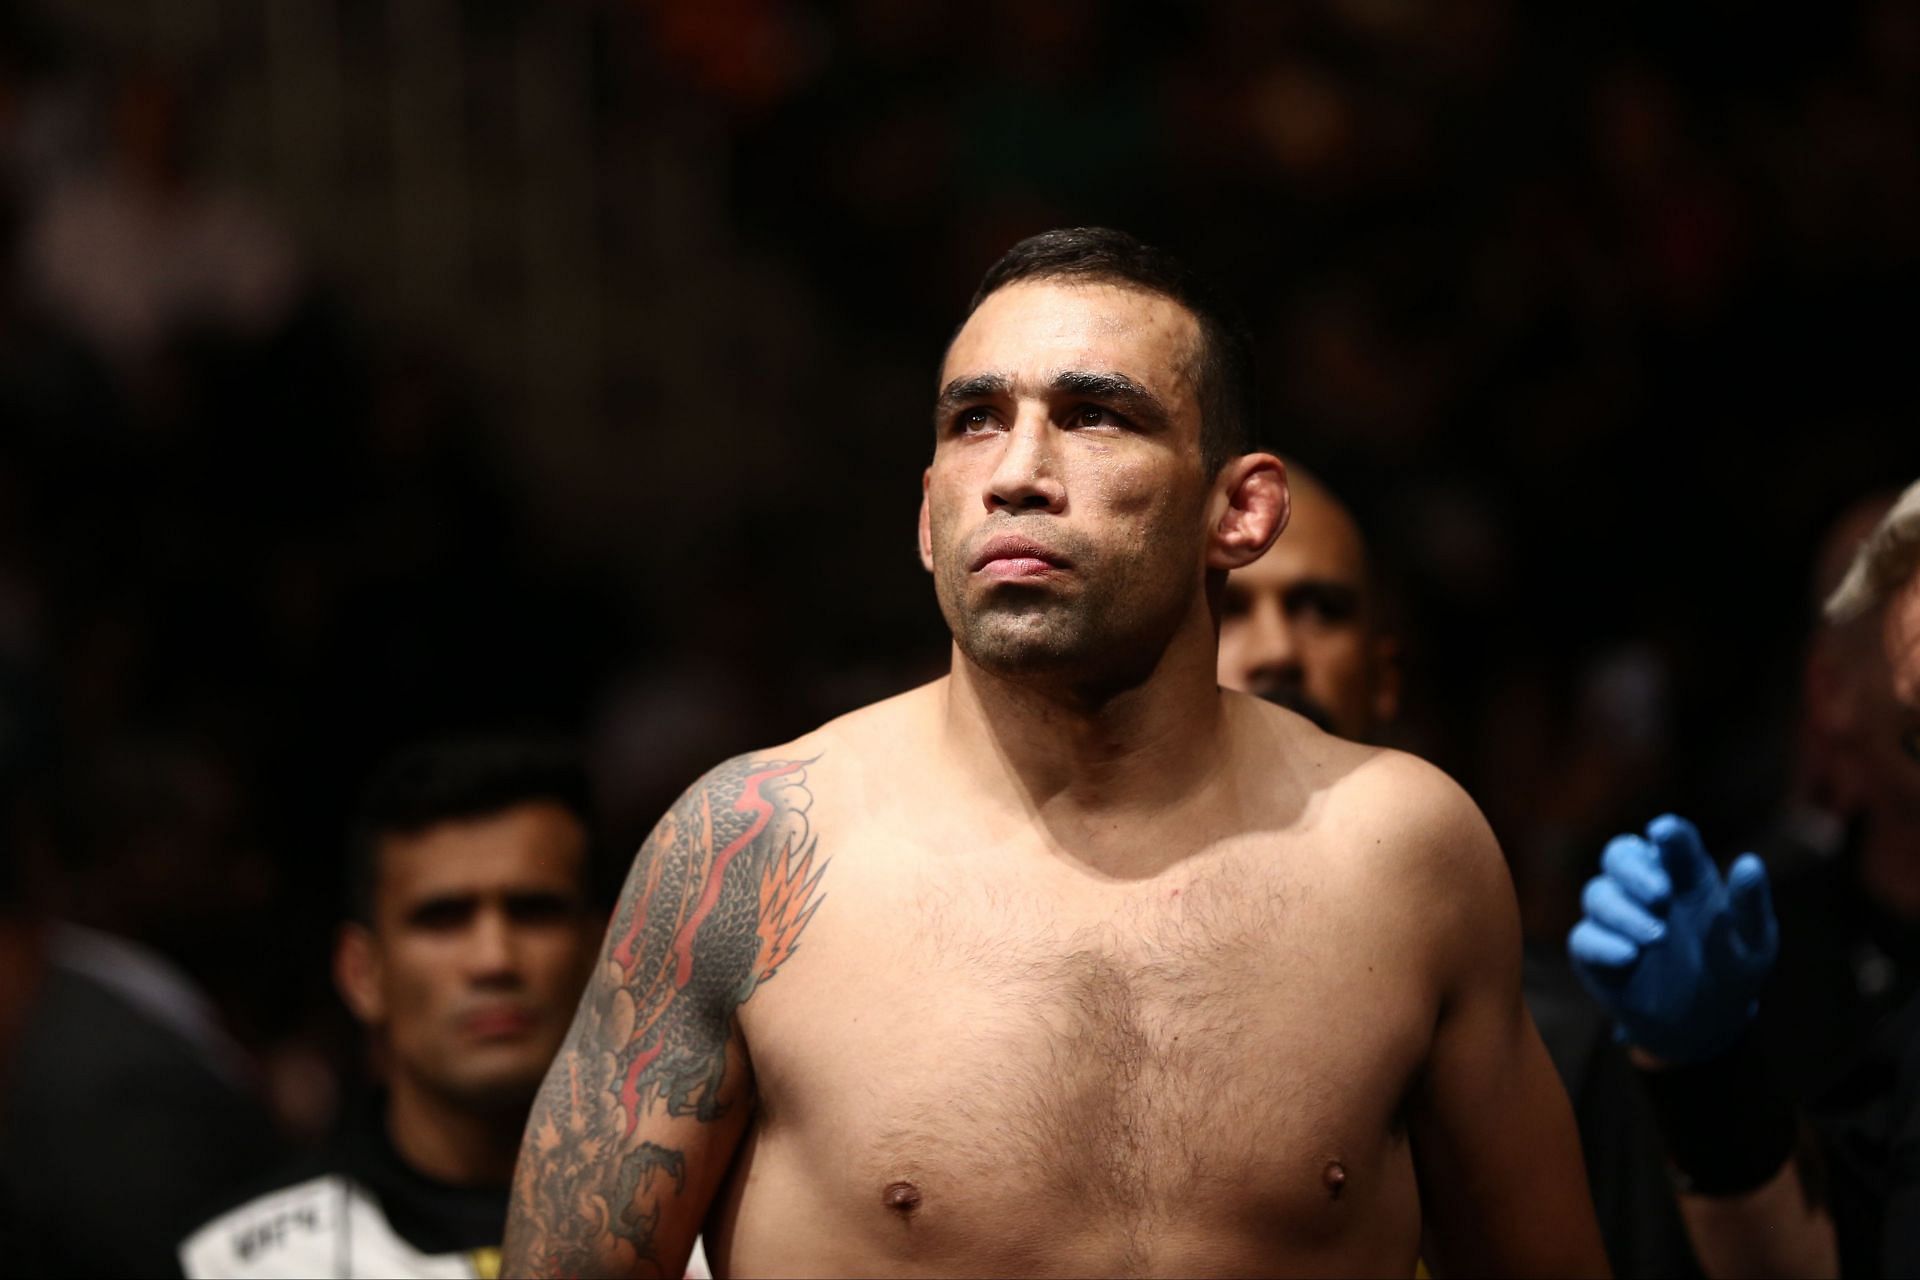 Fabricio Werdum washed out of the UFC in 2008, making his heavyweight title win in 2015 a big surprise